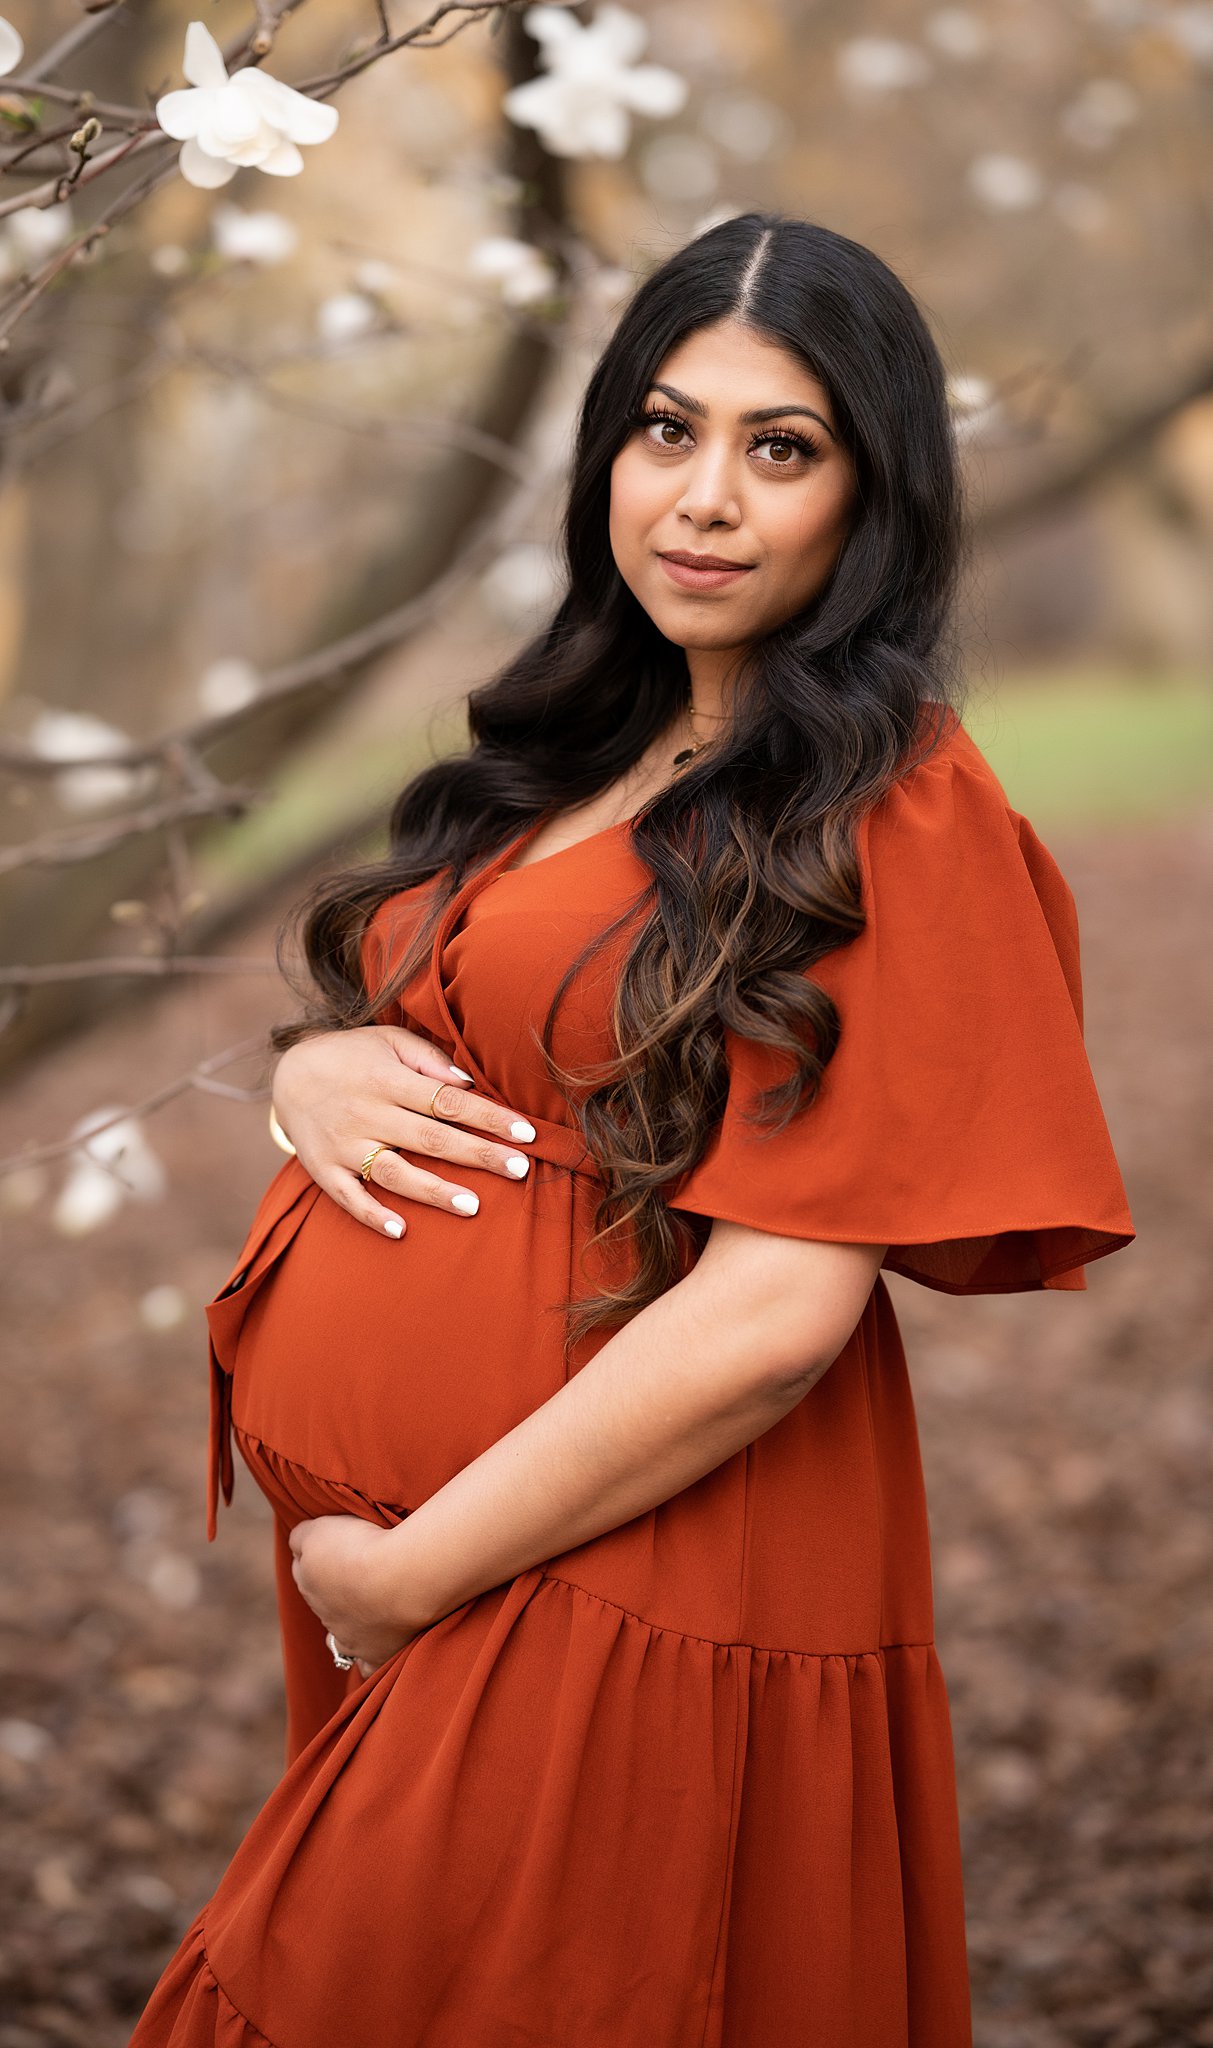 A mom to be holds her bump while standing in a park